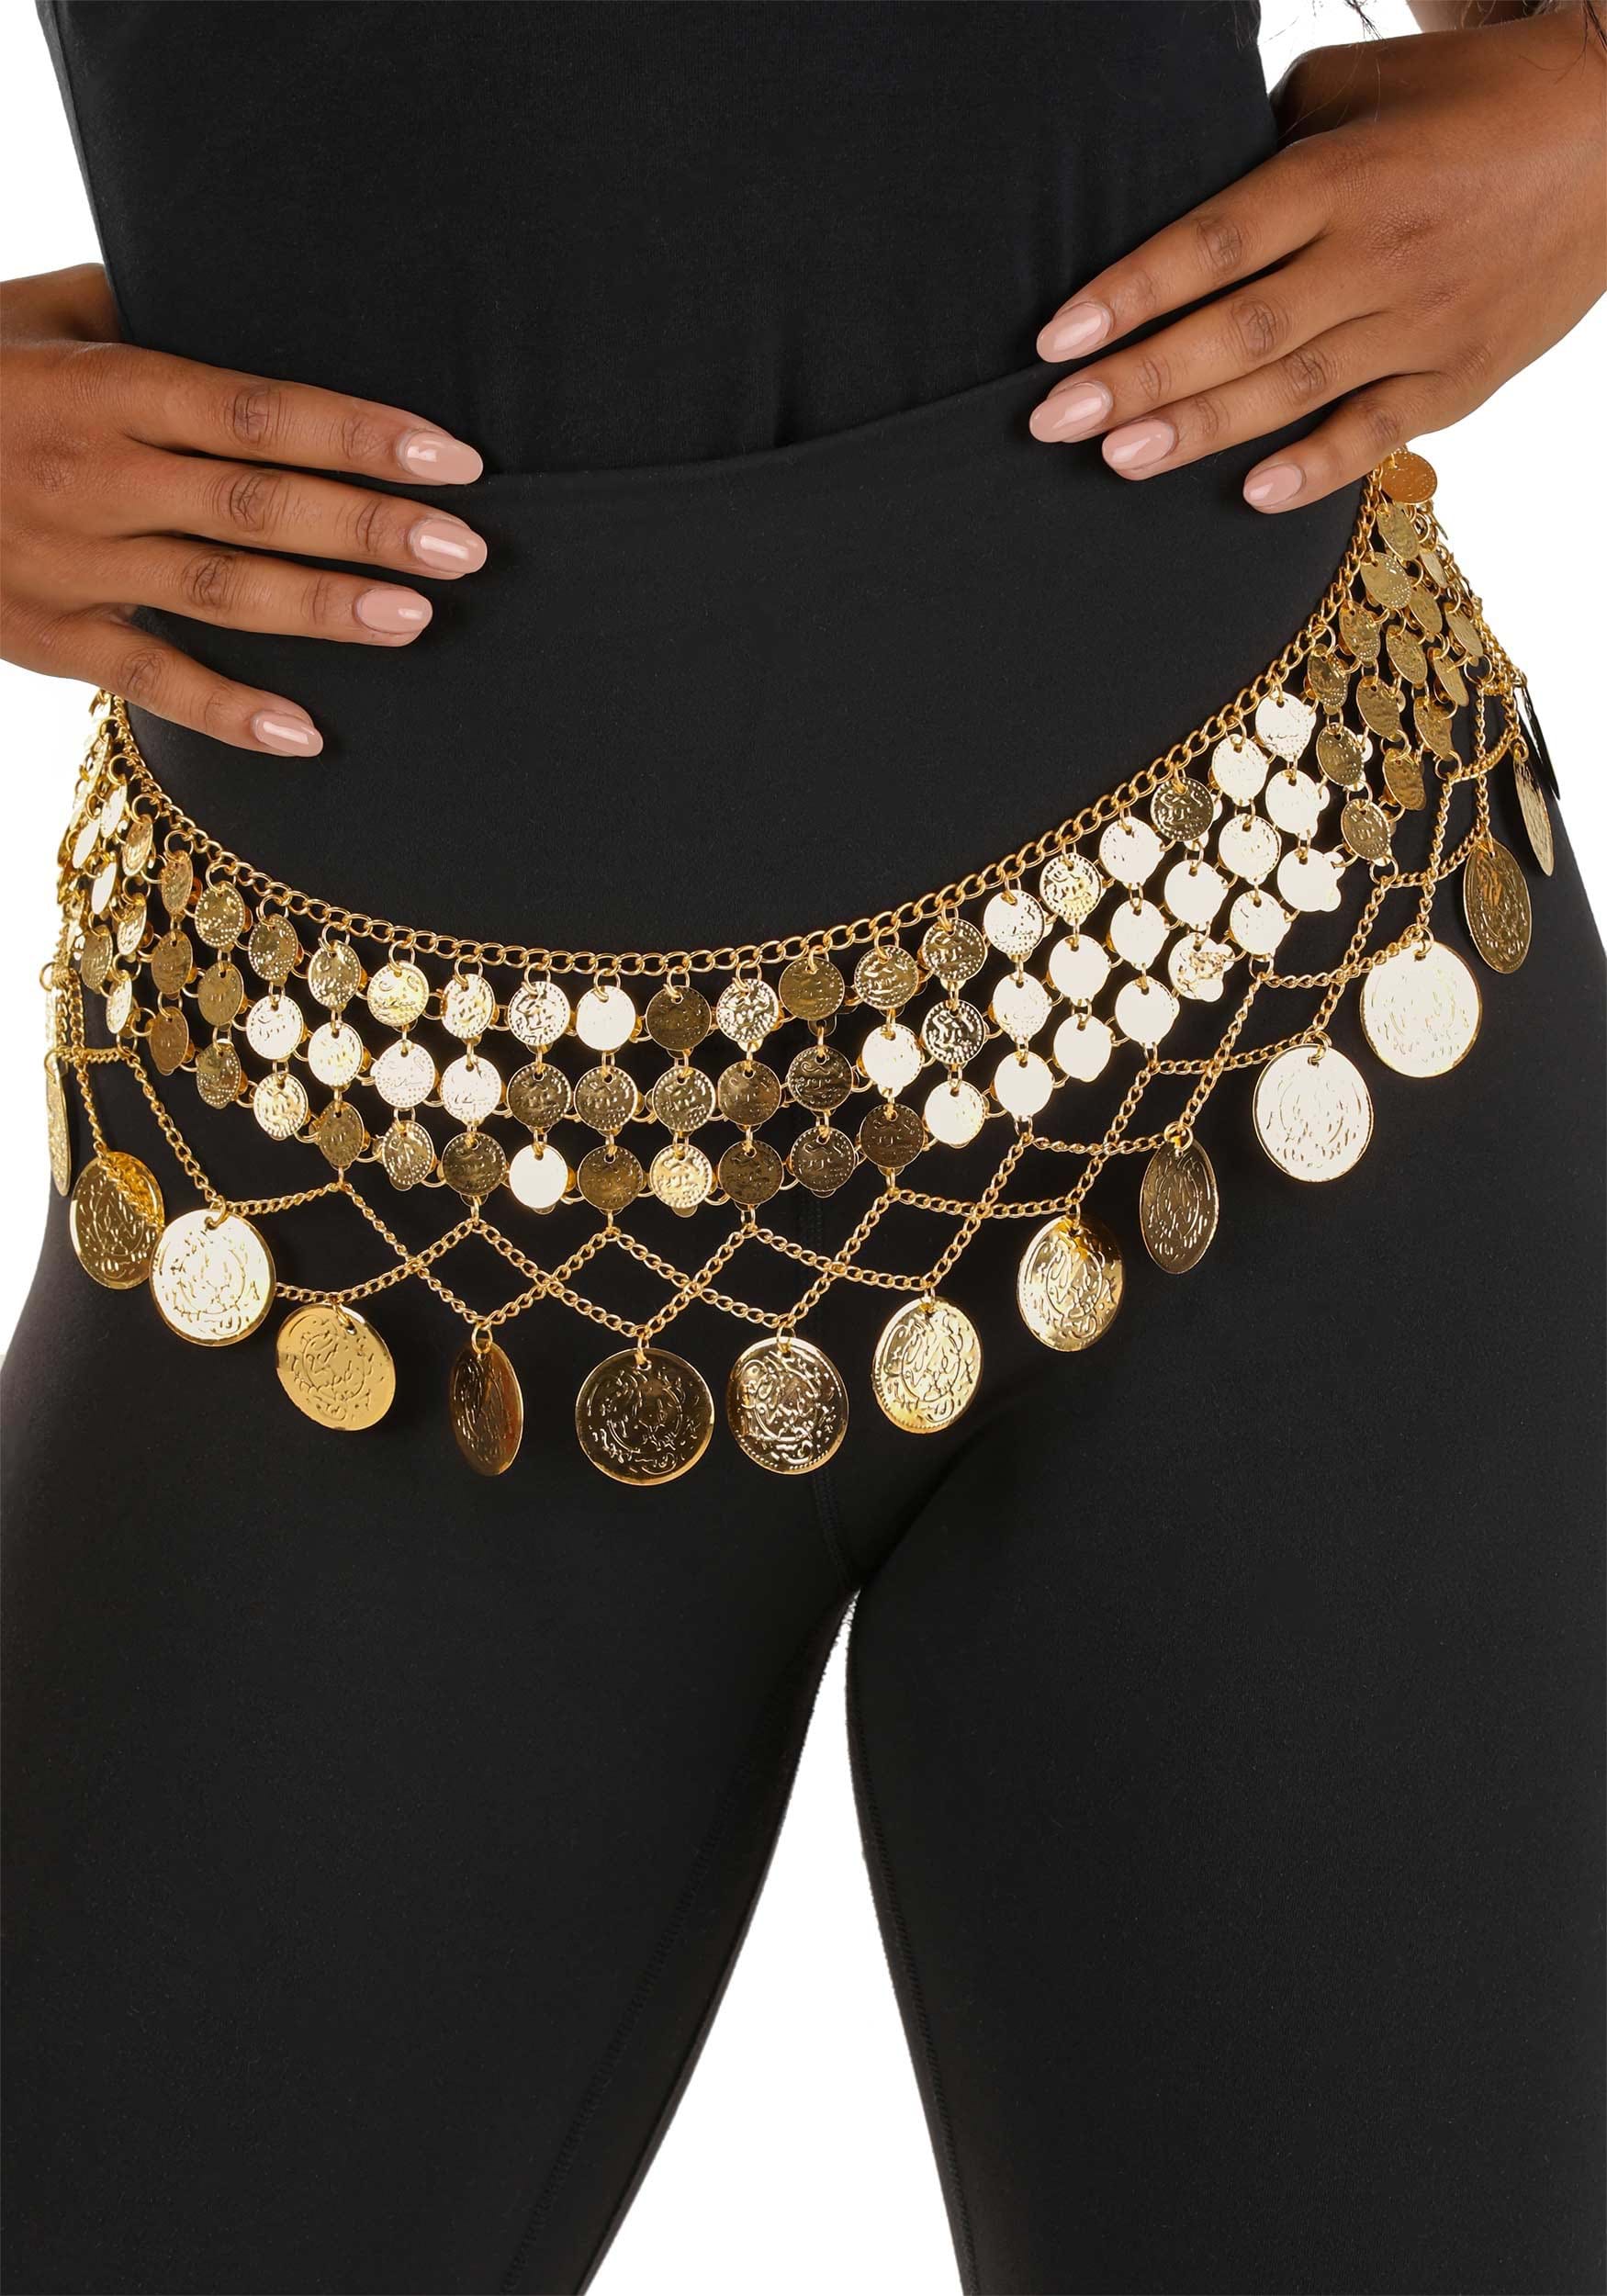 Gold Tribal Coin Belt Belly Dance Coin Belt With Coin Fringe Queen